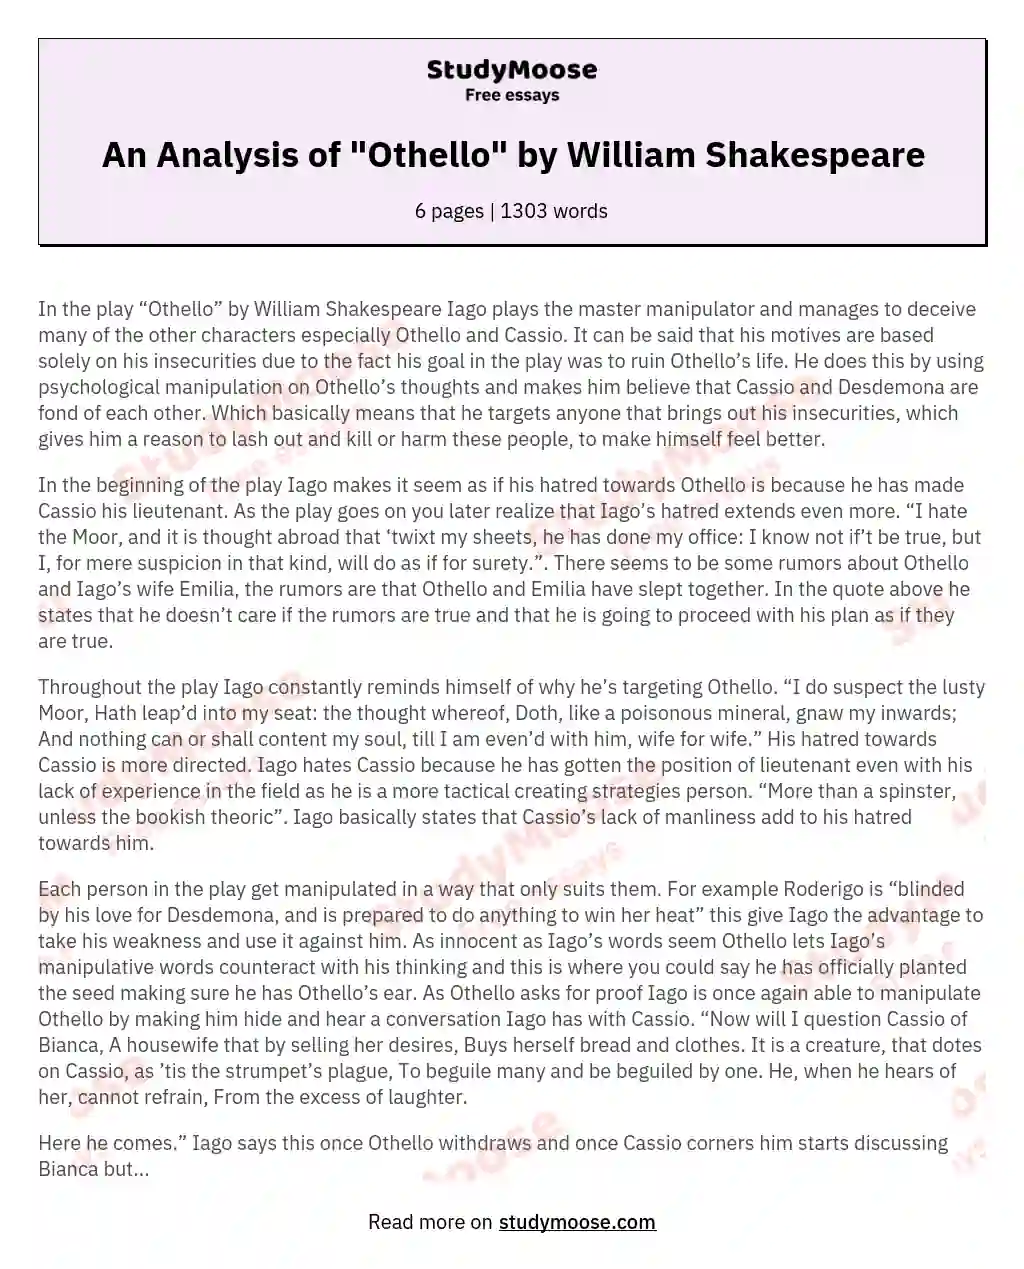 An Analysis of "Othello" by William Shakespeare essay